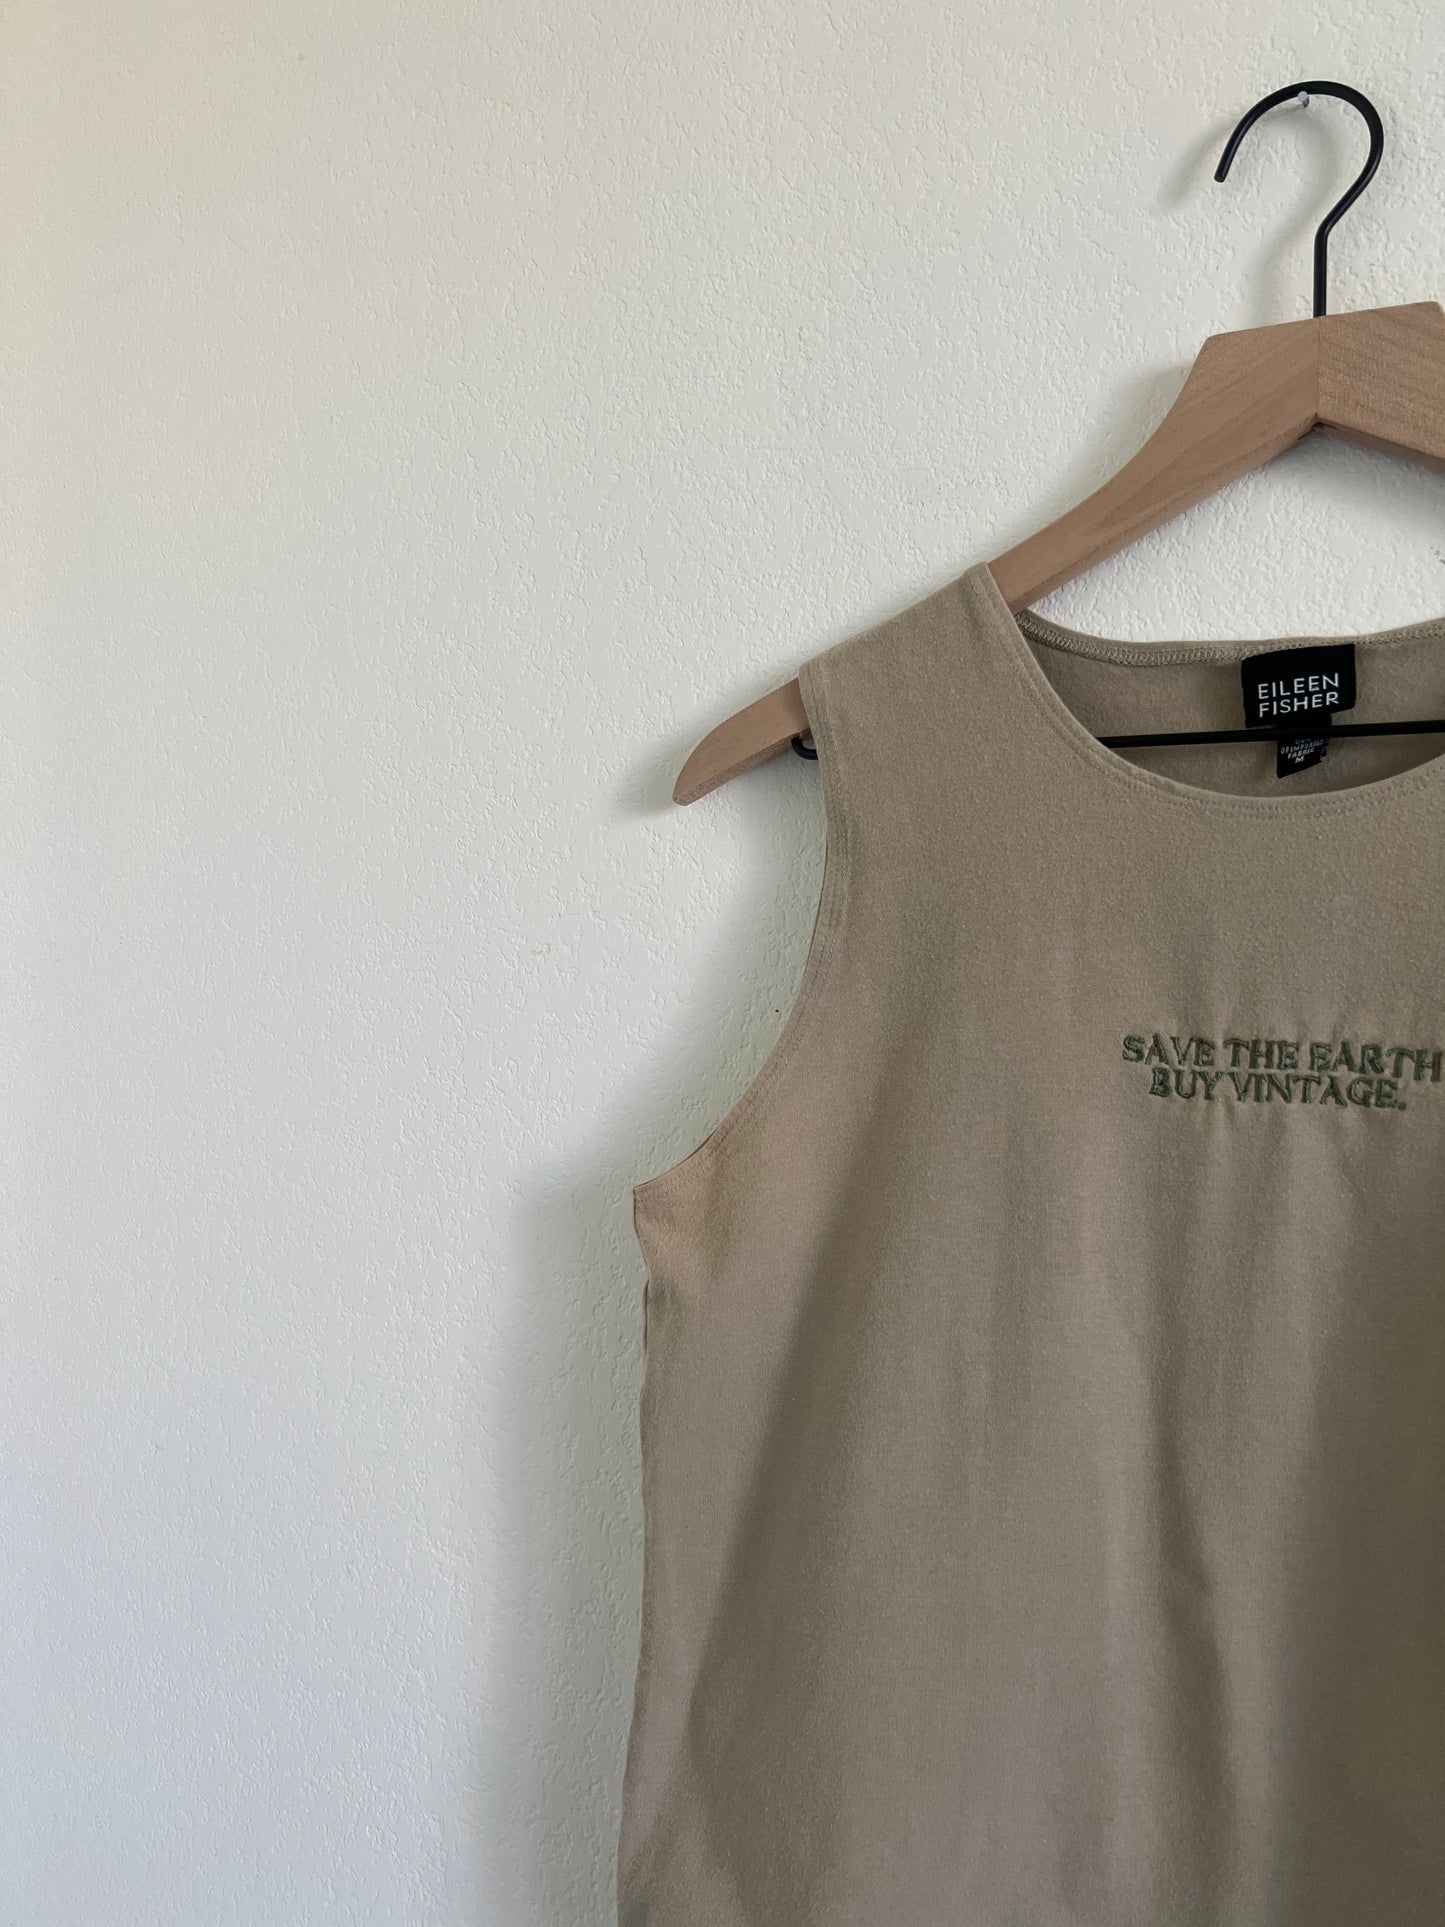 Save The Earth Buy Vintage Tank in Desert (M)